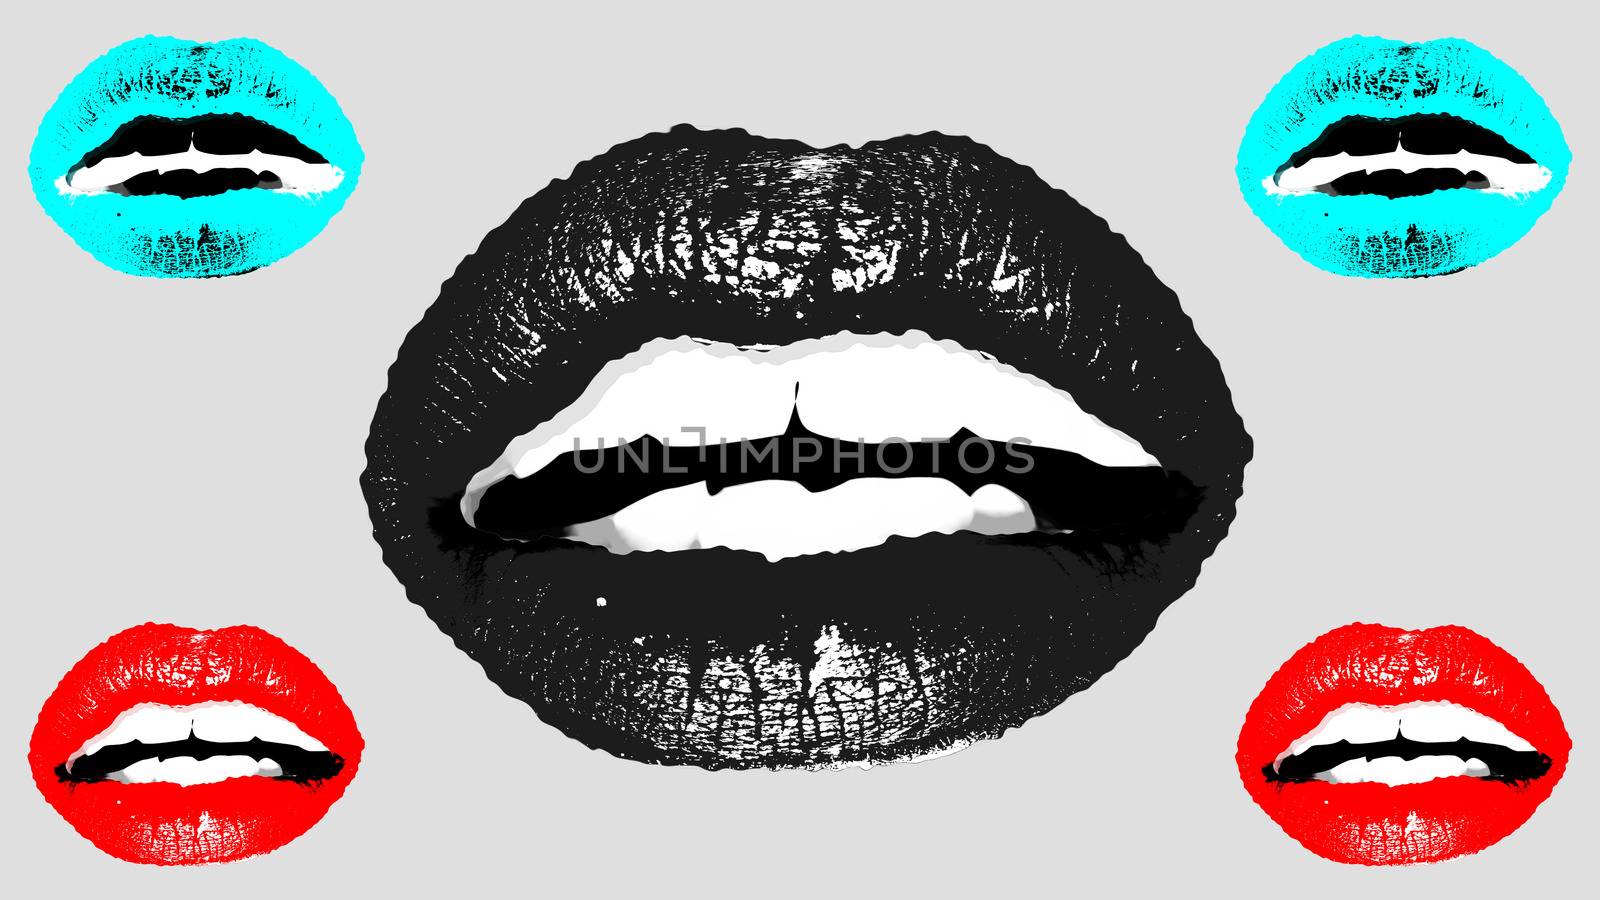 An emotional 3d rendering of five appealing female mouths with blue, red and black lips and black and white teeth in the white background. They look attractive and exciting.